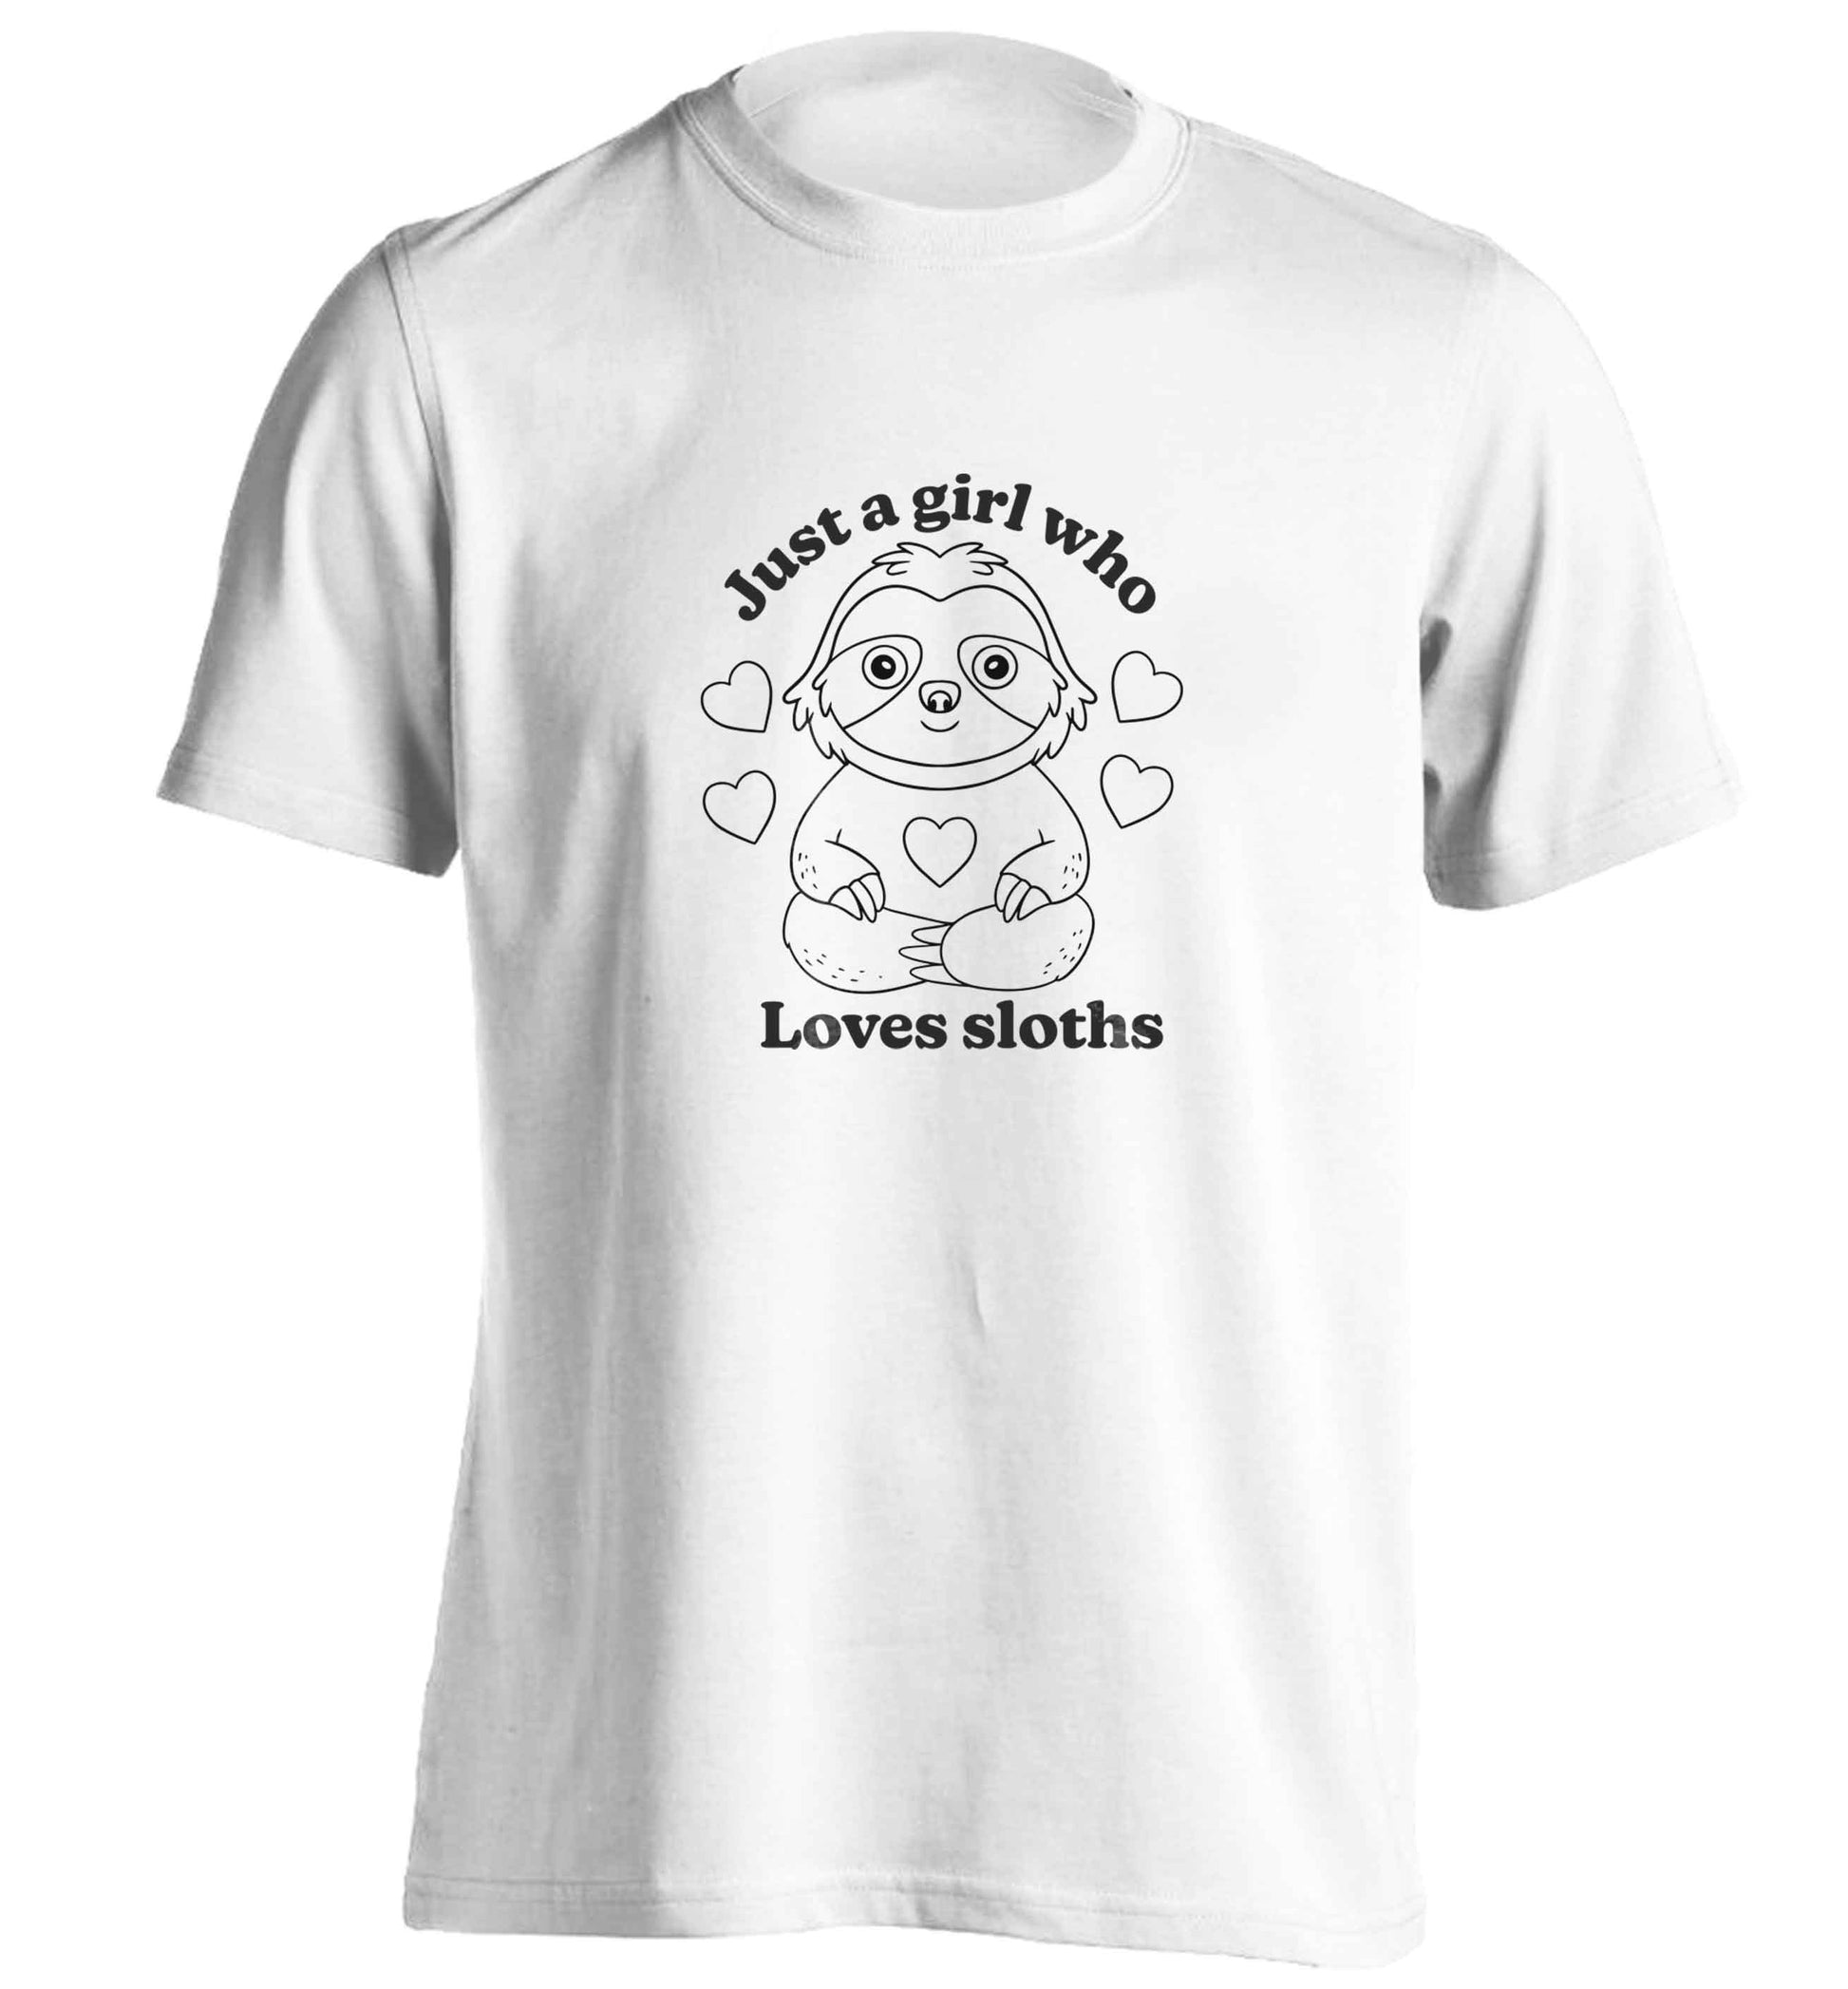 Just a girl who loves sloths adults unisex white Tshirt 2XL